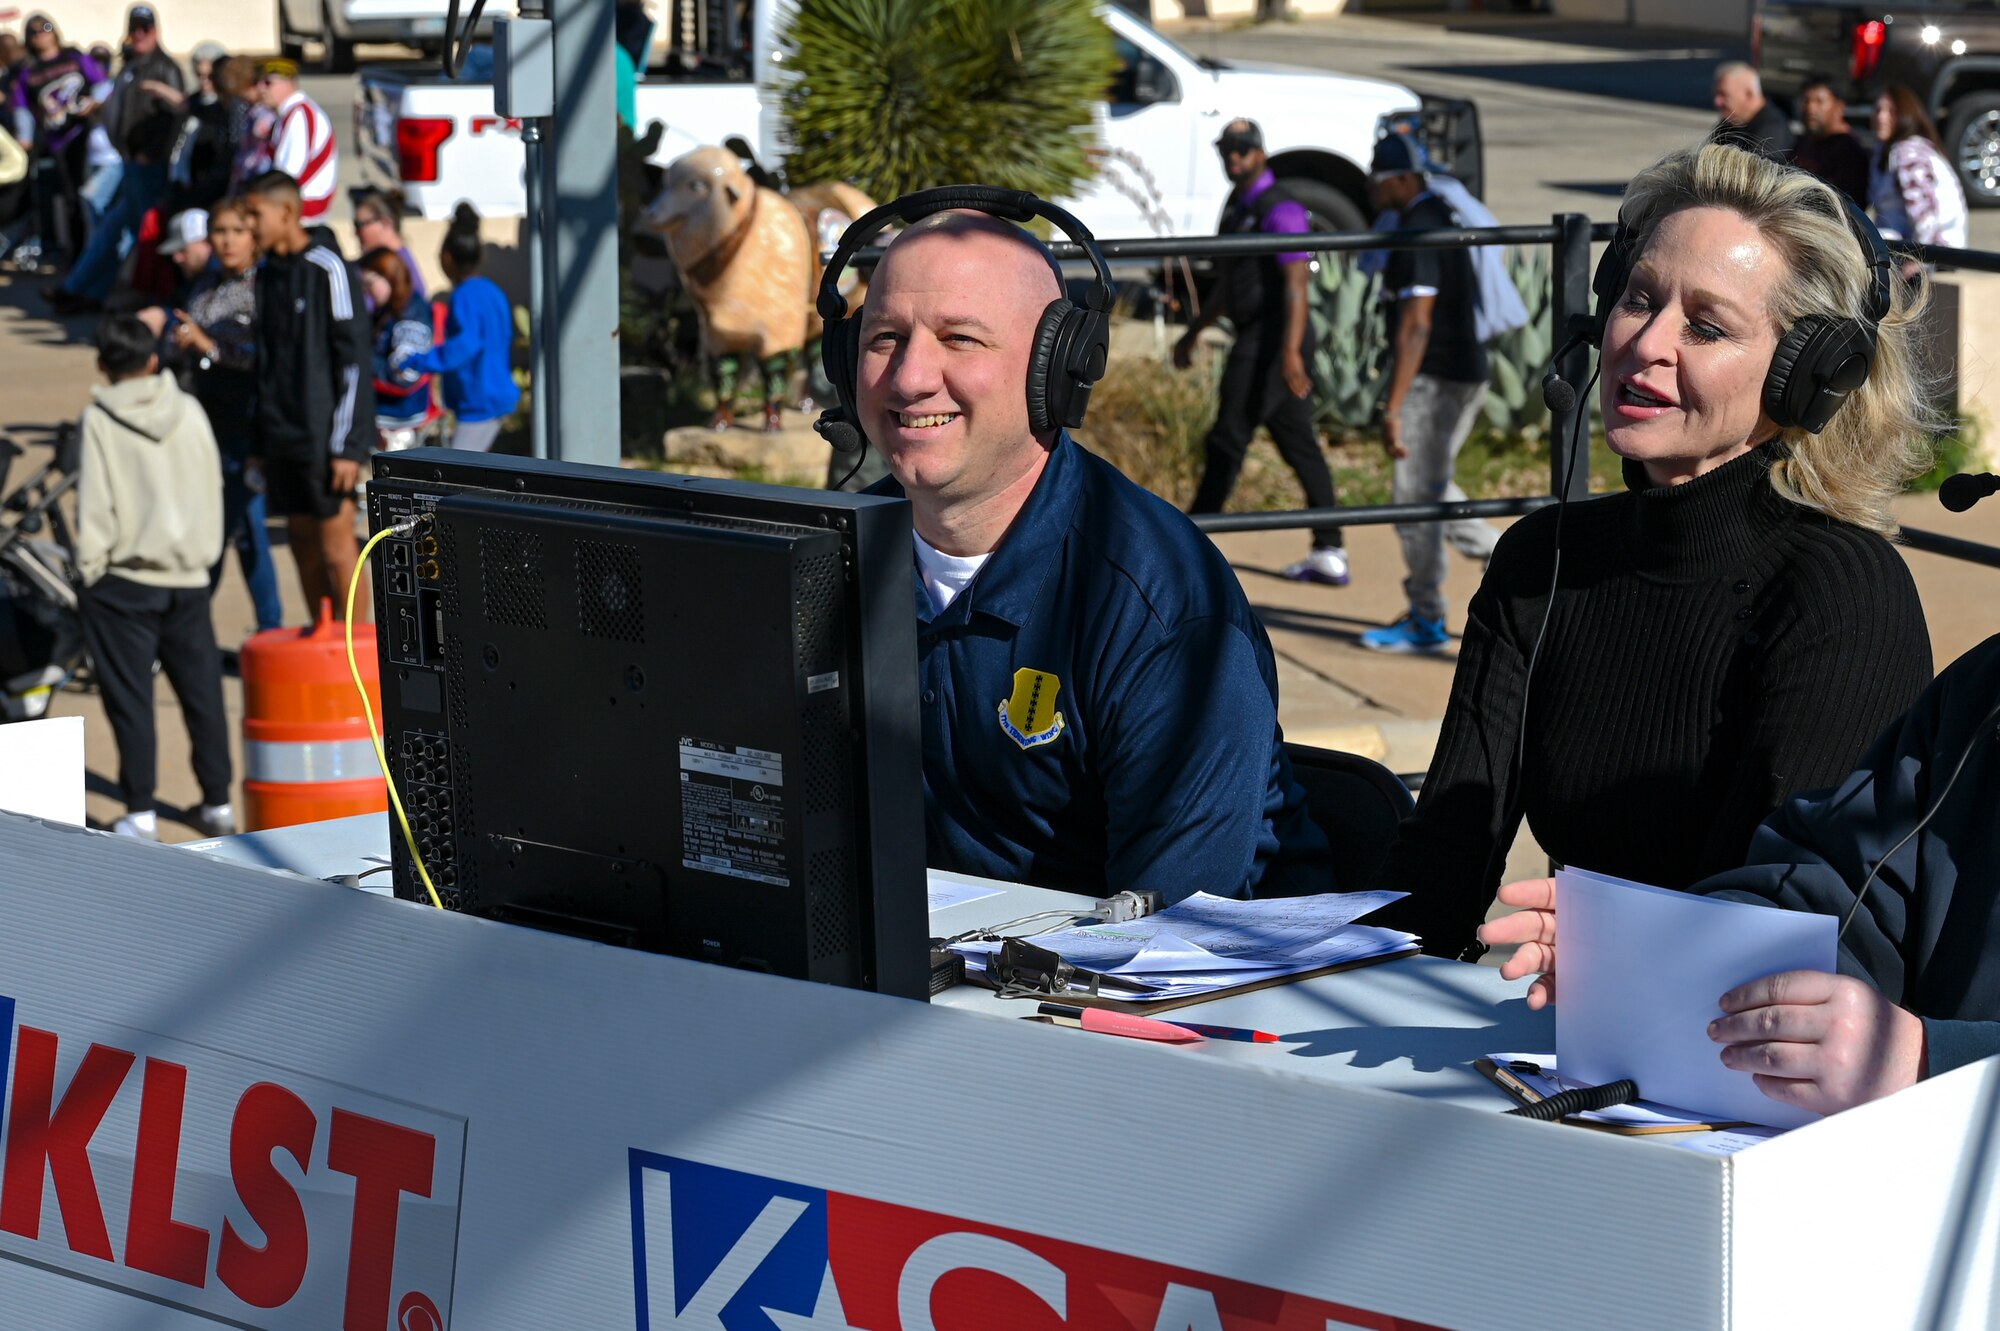 U.S. Air Force Col. Matthew Reilman, 17th Training Wing commander, smiles alongside KLST new anchors during the All Veterans Council Veterans Day celebration parade, San Angelo, Texas, Nov. 5, 2022. Reilman was invited to provide commentary and insight into the operations of Goodfellow Air Force Base during the live television broadcast of the parade. (U.S. Air Force photo by Senior Airman Michael Bowman)